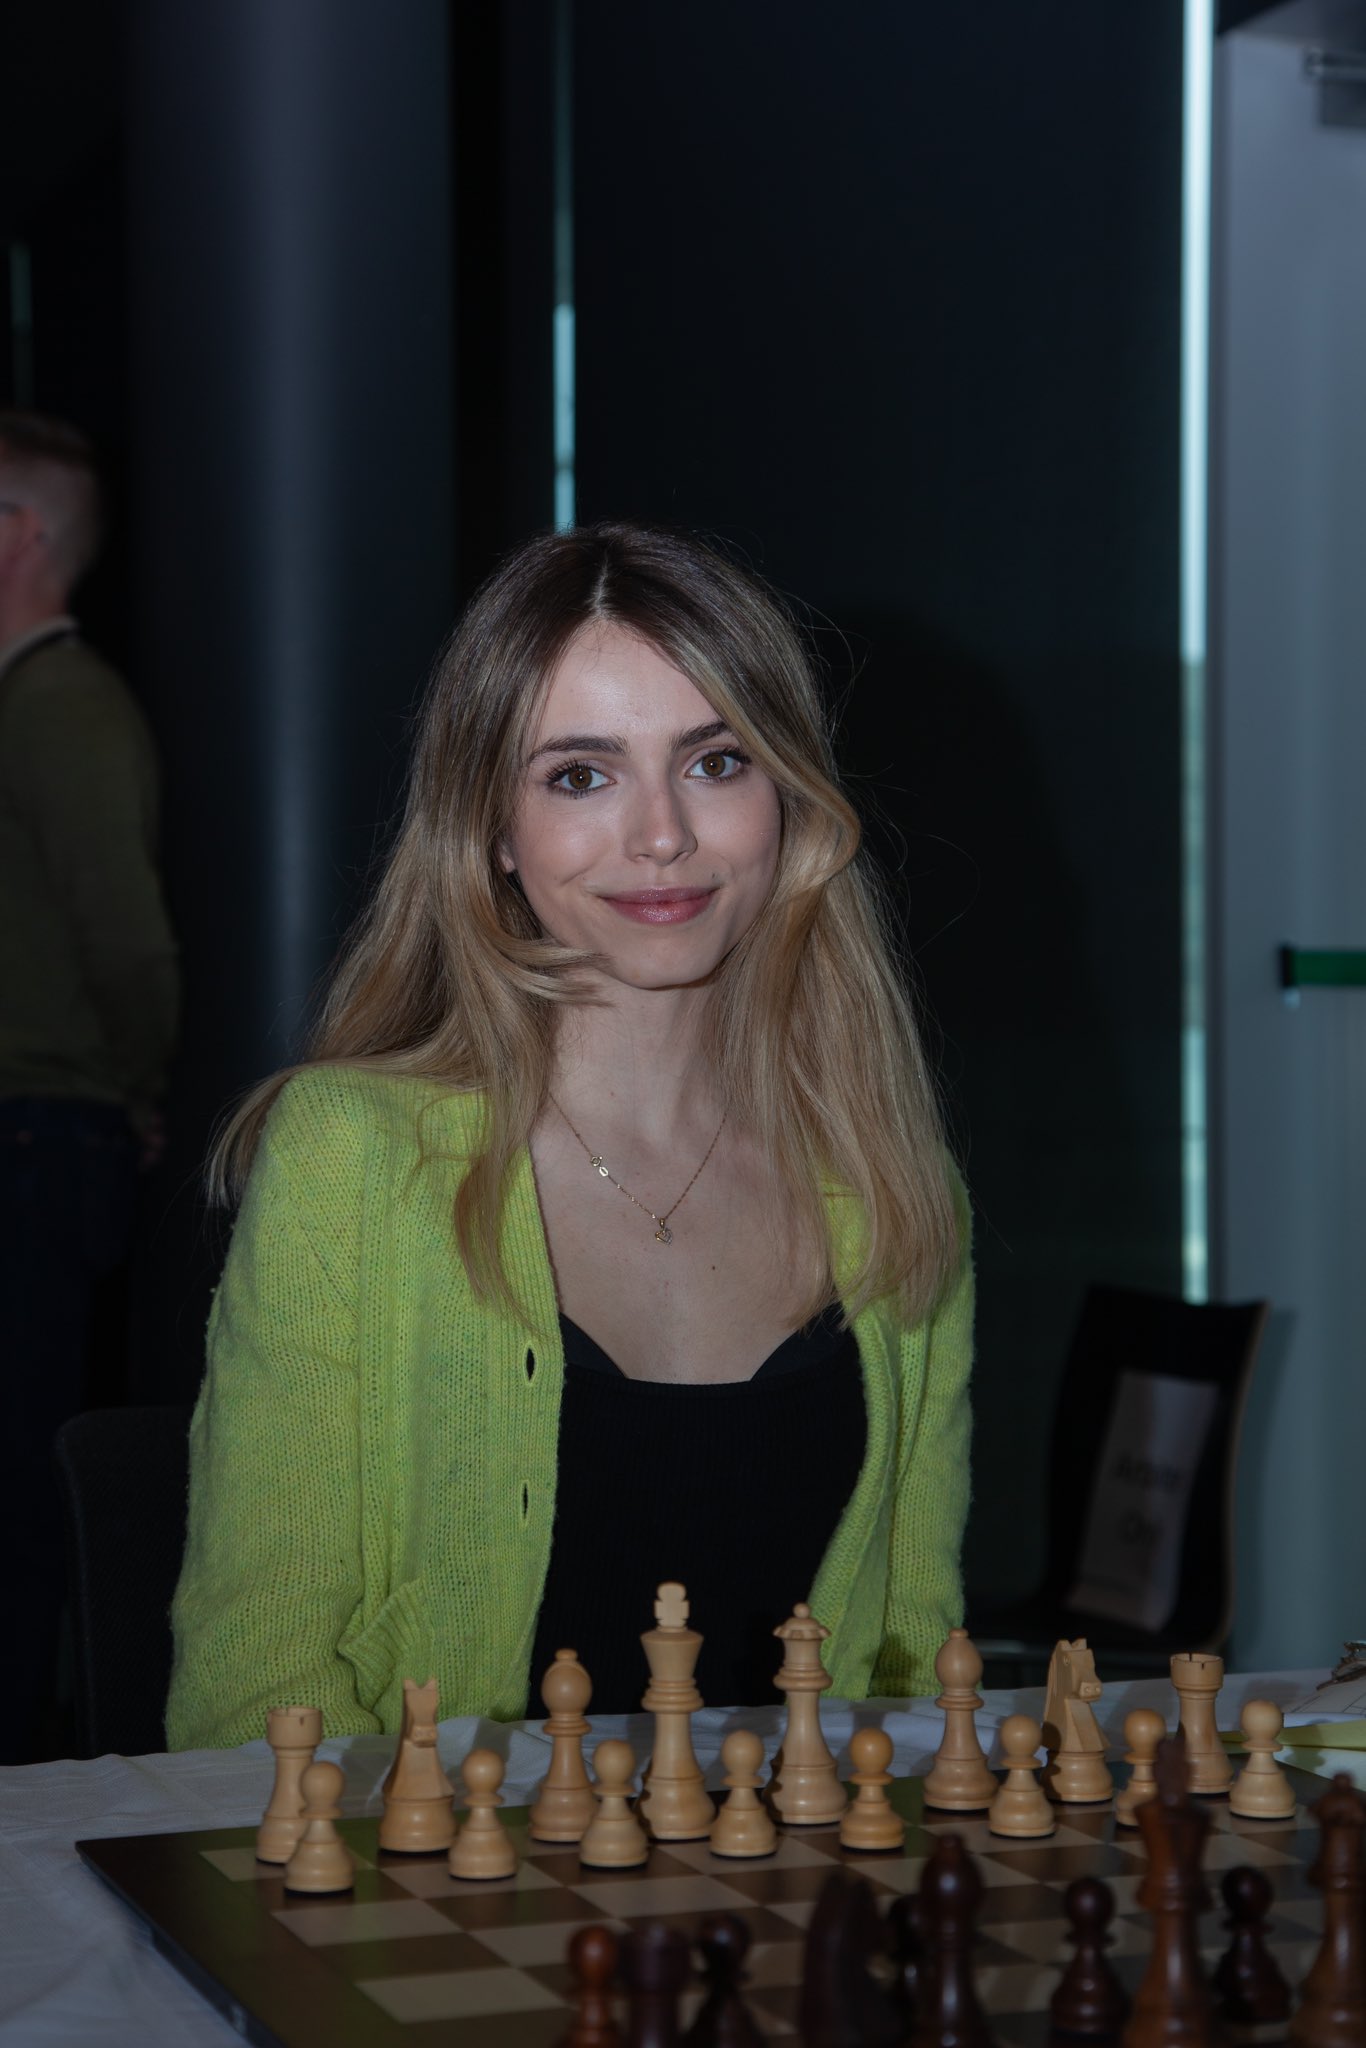 Anna Cramling on X: Already miss OTB chess! Wanna play more chess  tournaments this year If you're a chess organiser that wants to bring more  awareness to your tournament, DM/contact me :)